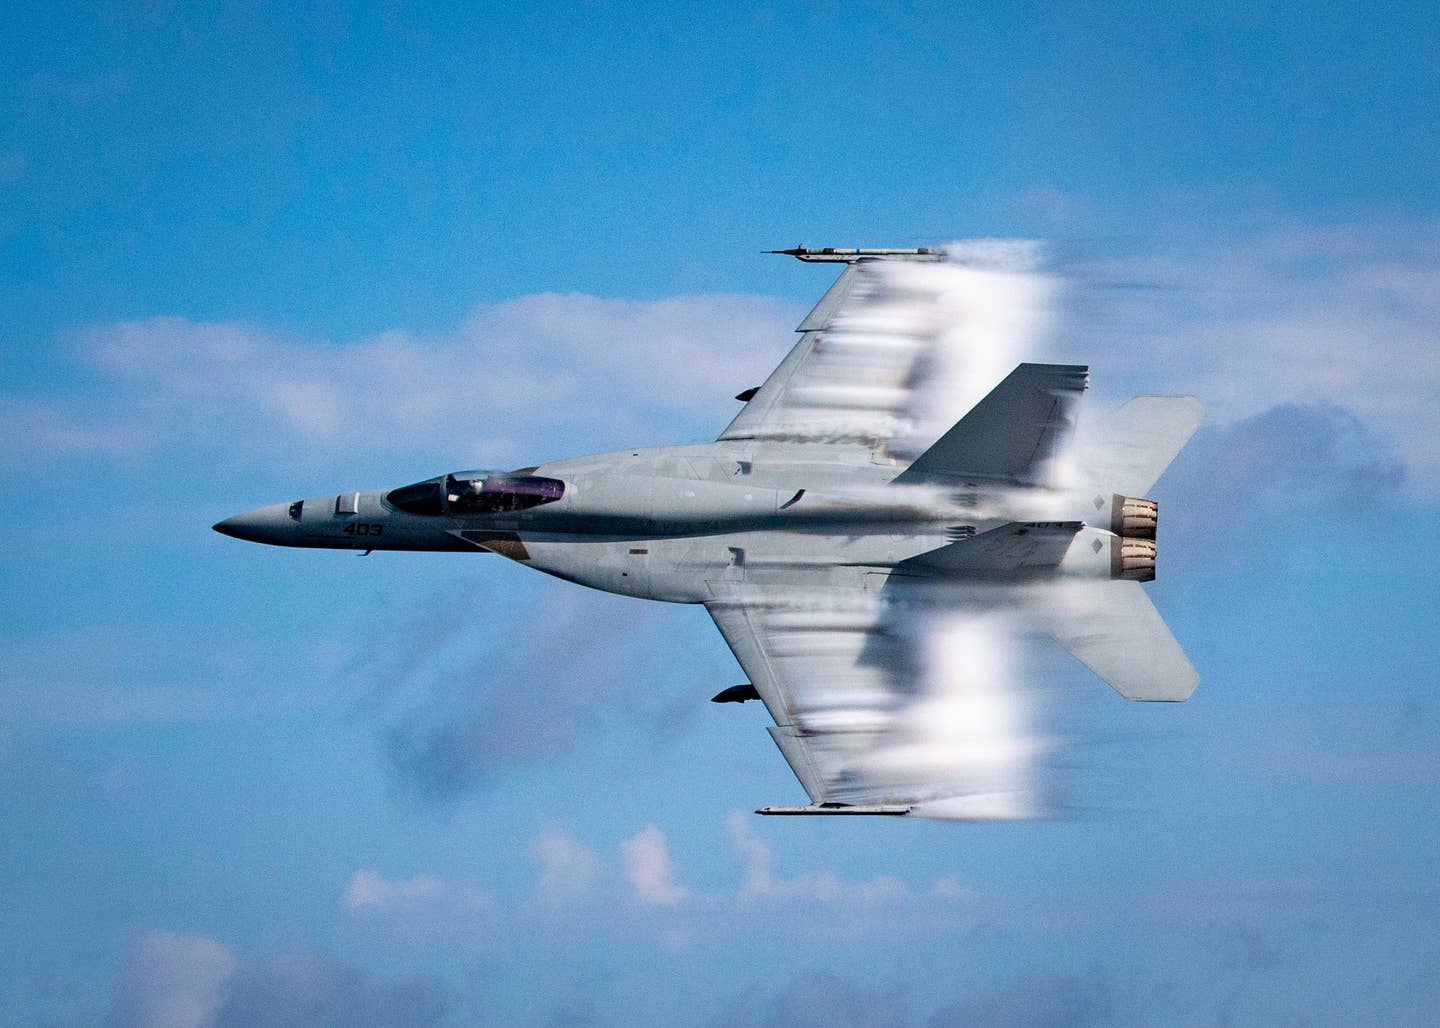 An F/A-18E executing a high-speed flyby. (U.S. Navy photo by Mass Communication Specialist 2nd Class Cameron Stoner)